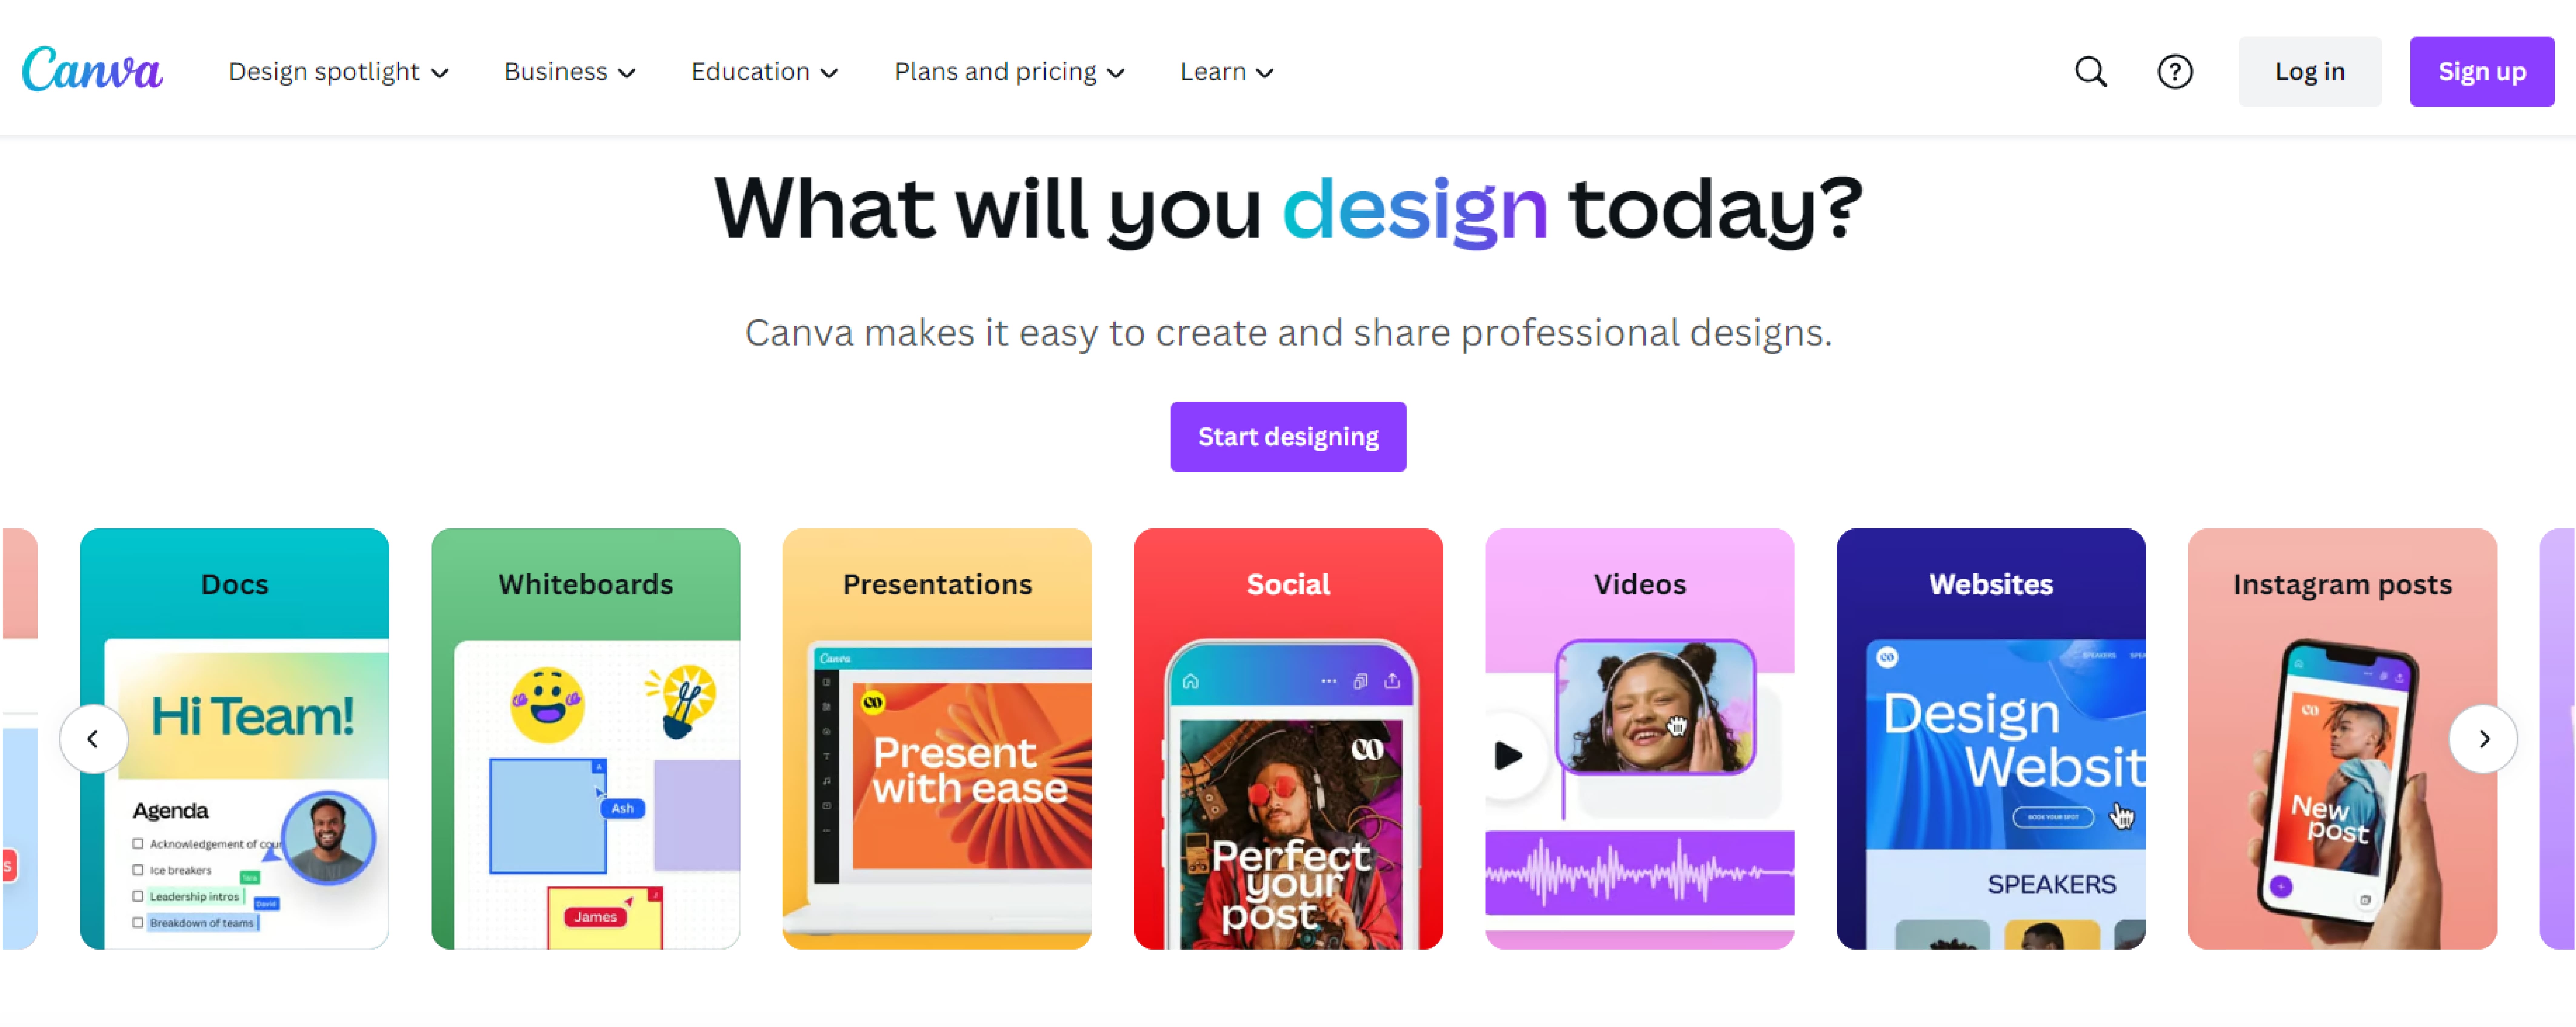 Canva is a great tool for a real estate social media manager